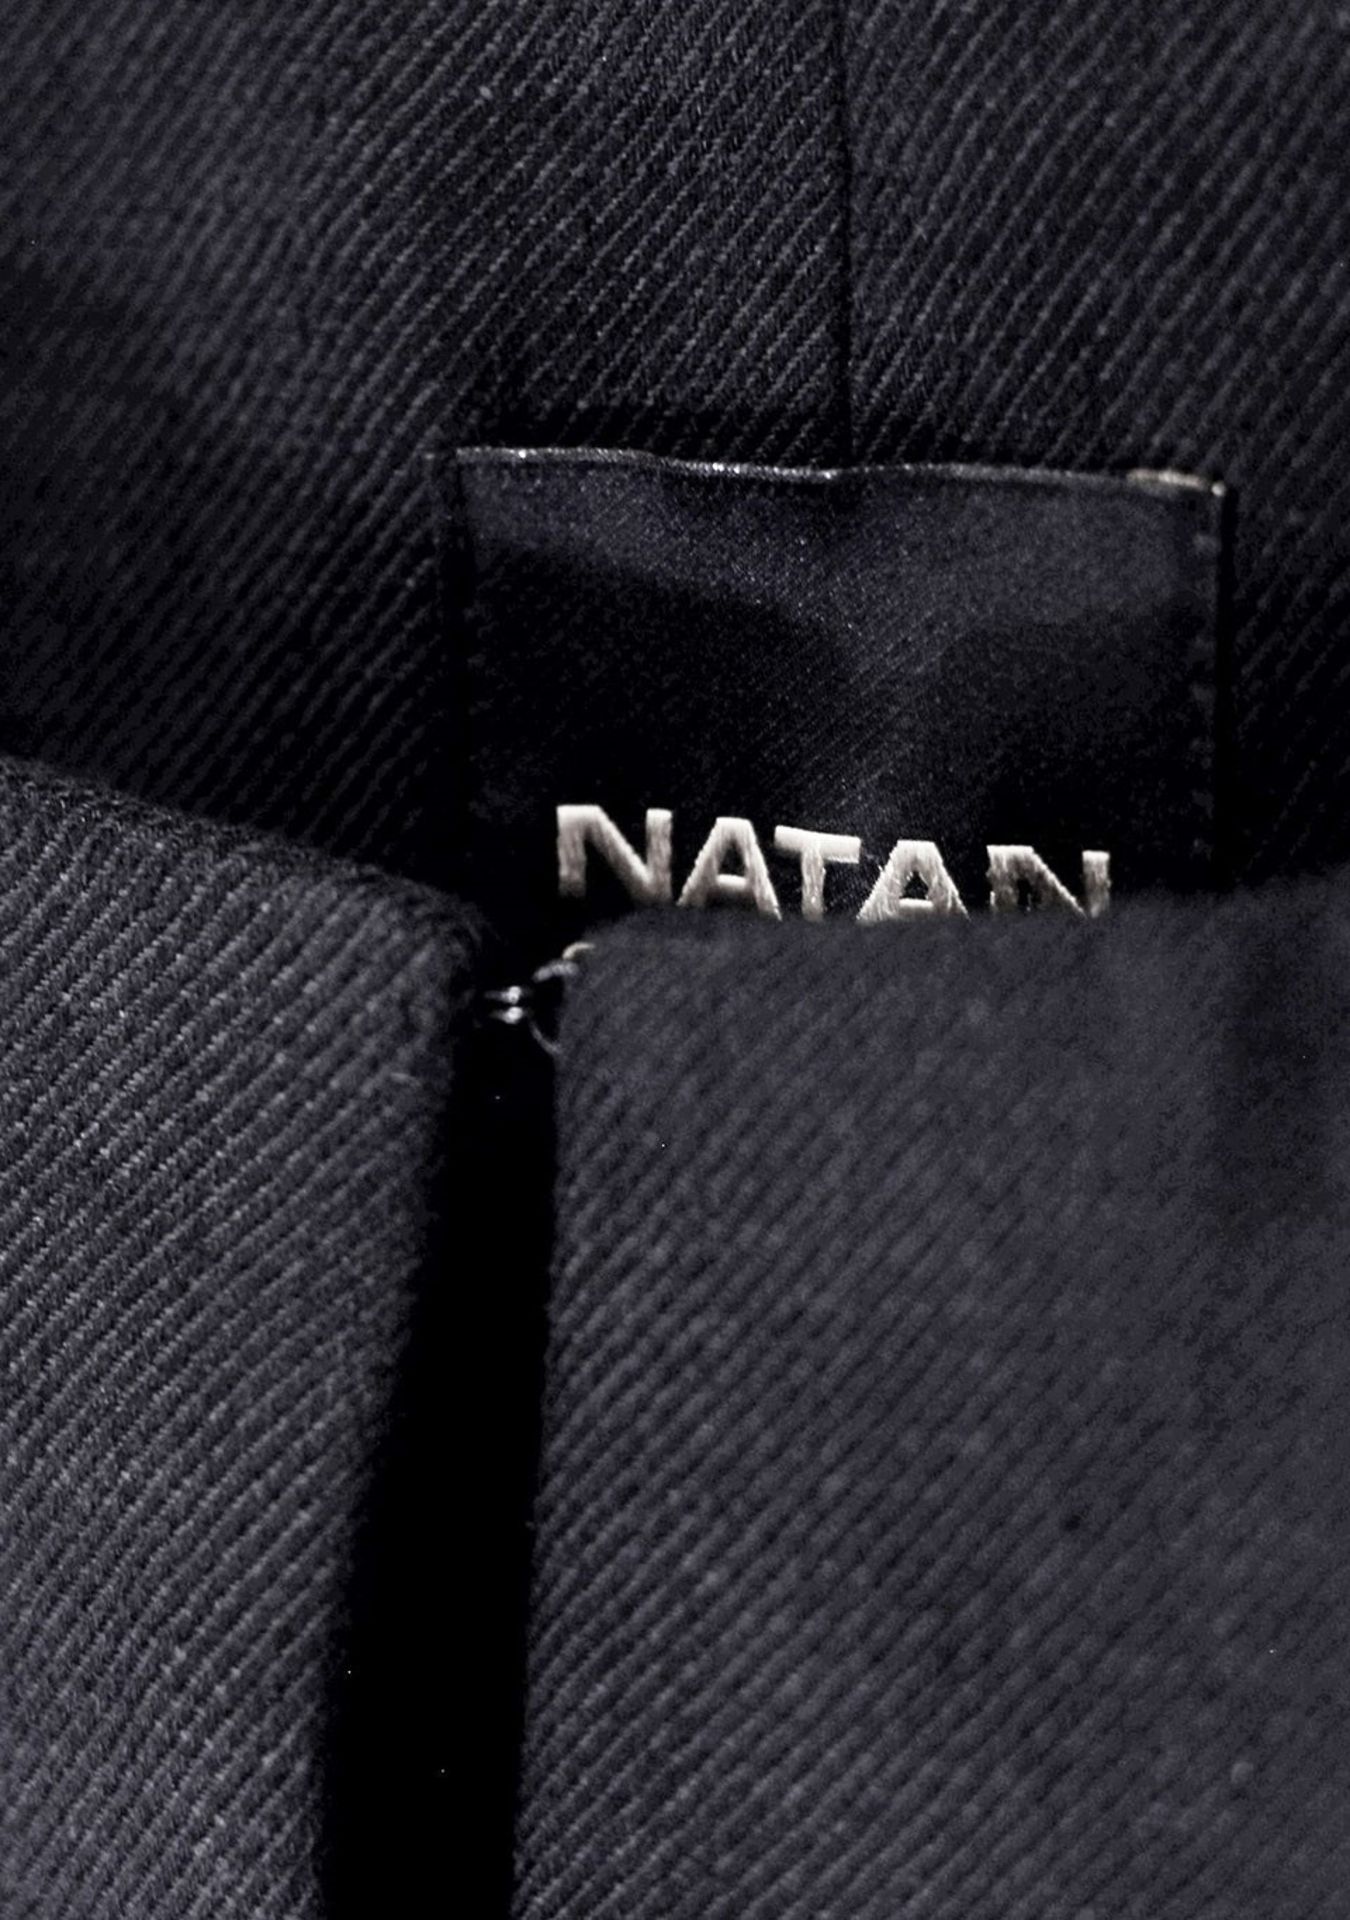 1 x Natan Black Bolero - Size: 10 - Material: 100% Linen - From a High End Clothing Boutique In - Image 3 of 10